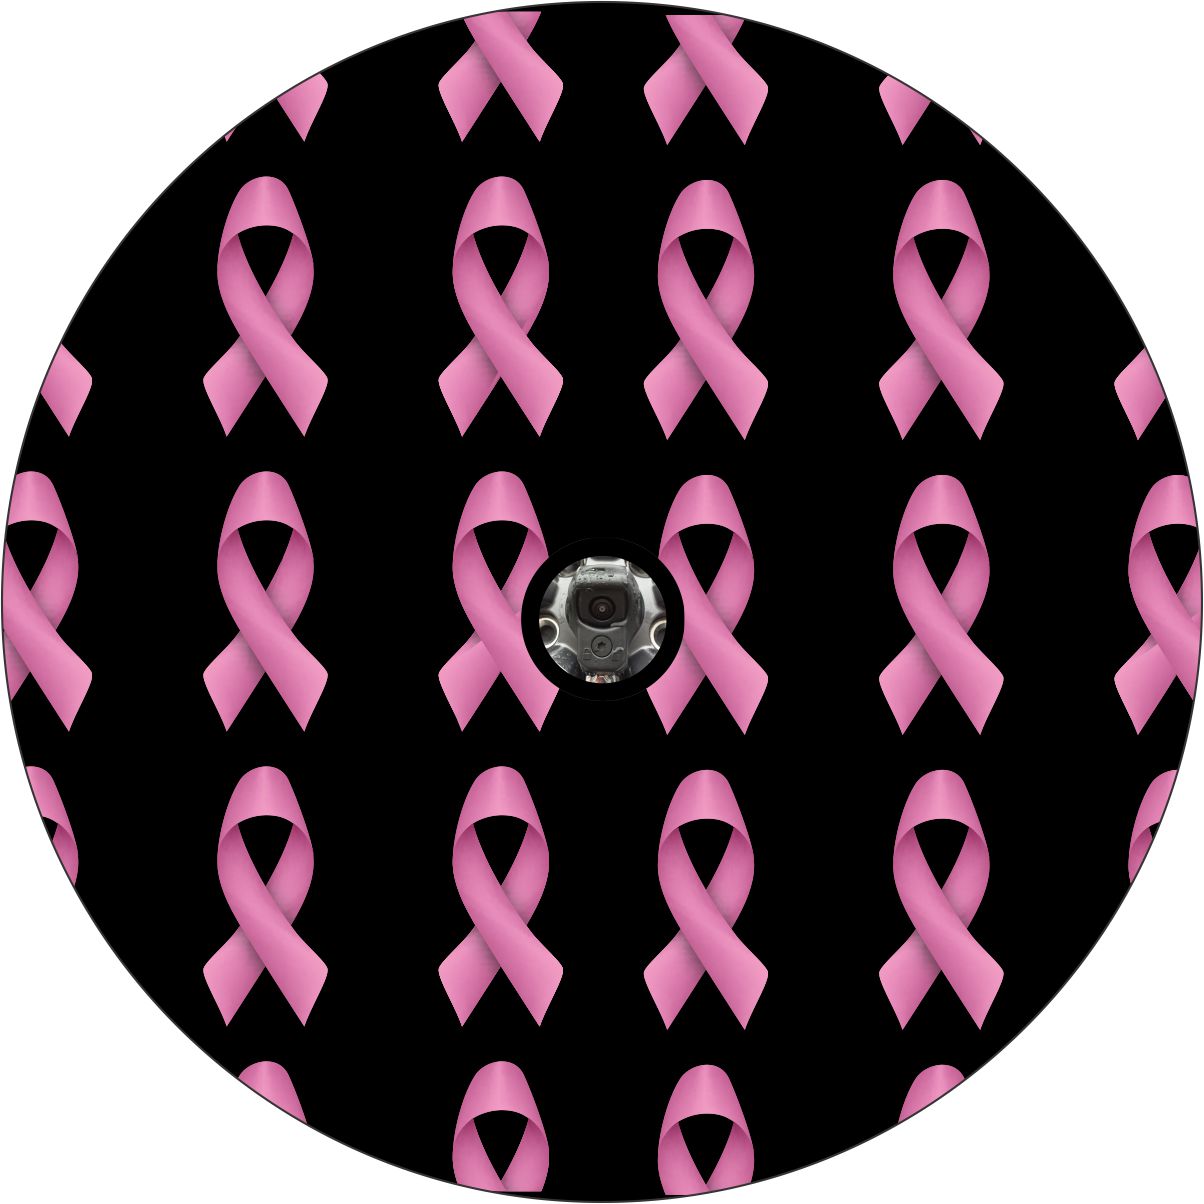 Black vinyl spare tire cover with a camera hole with a pattern of small pink ribbons to support breast cancer awareness